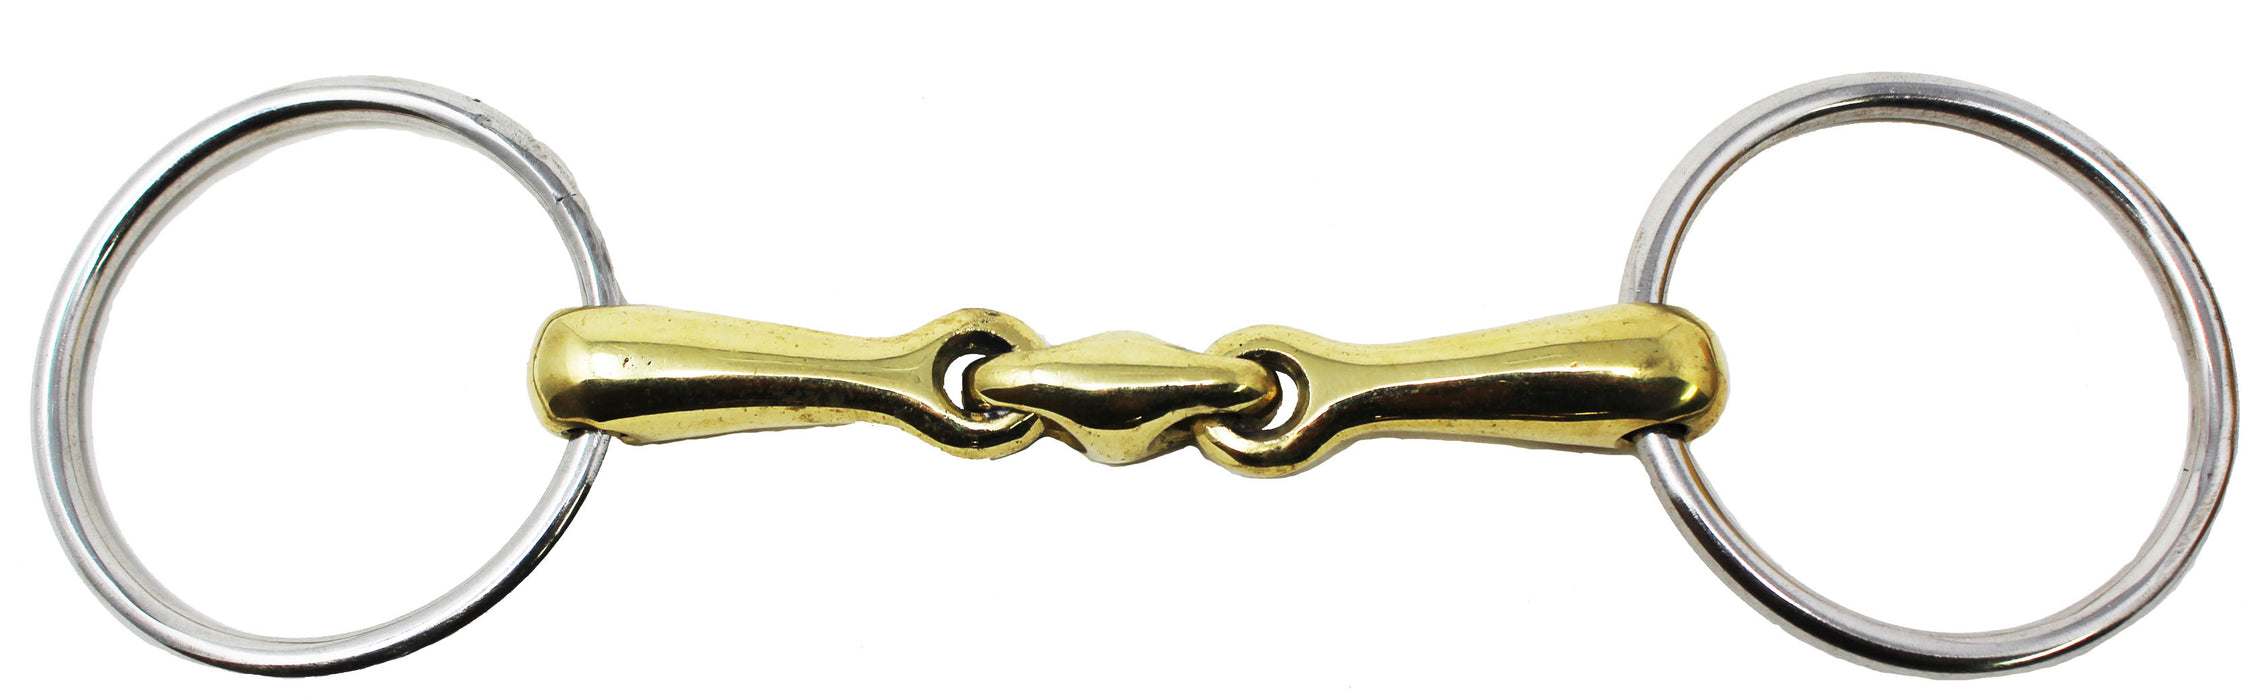 Copper Plus Double-Jointed Loose Ring Snaffle Bit Metallic Link Horse Bit 35193